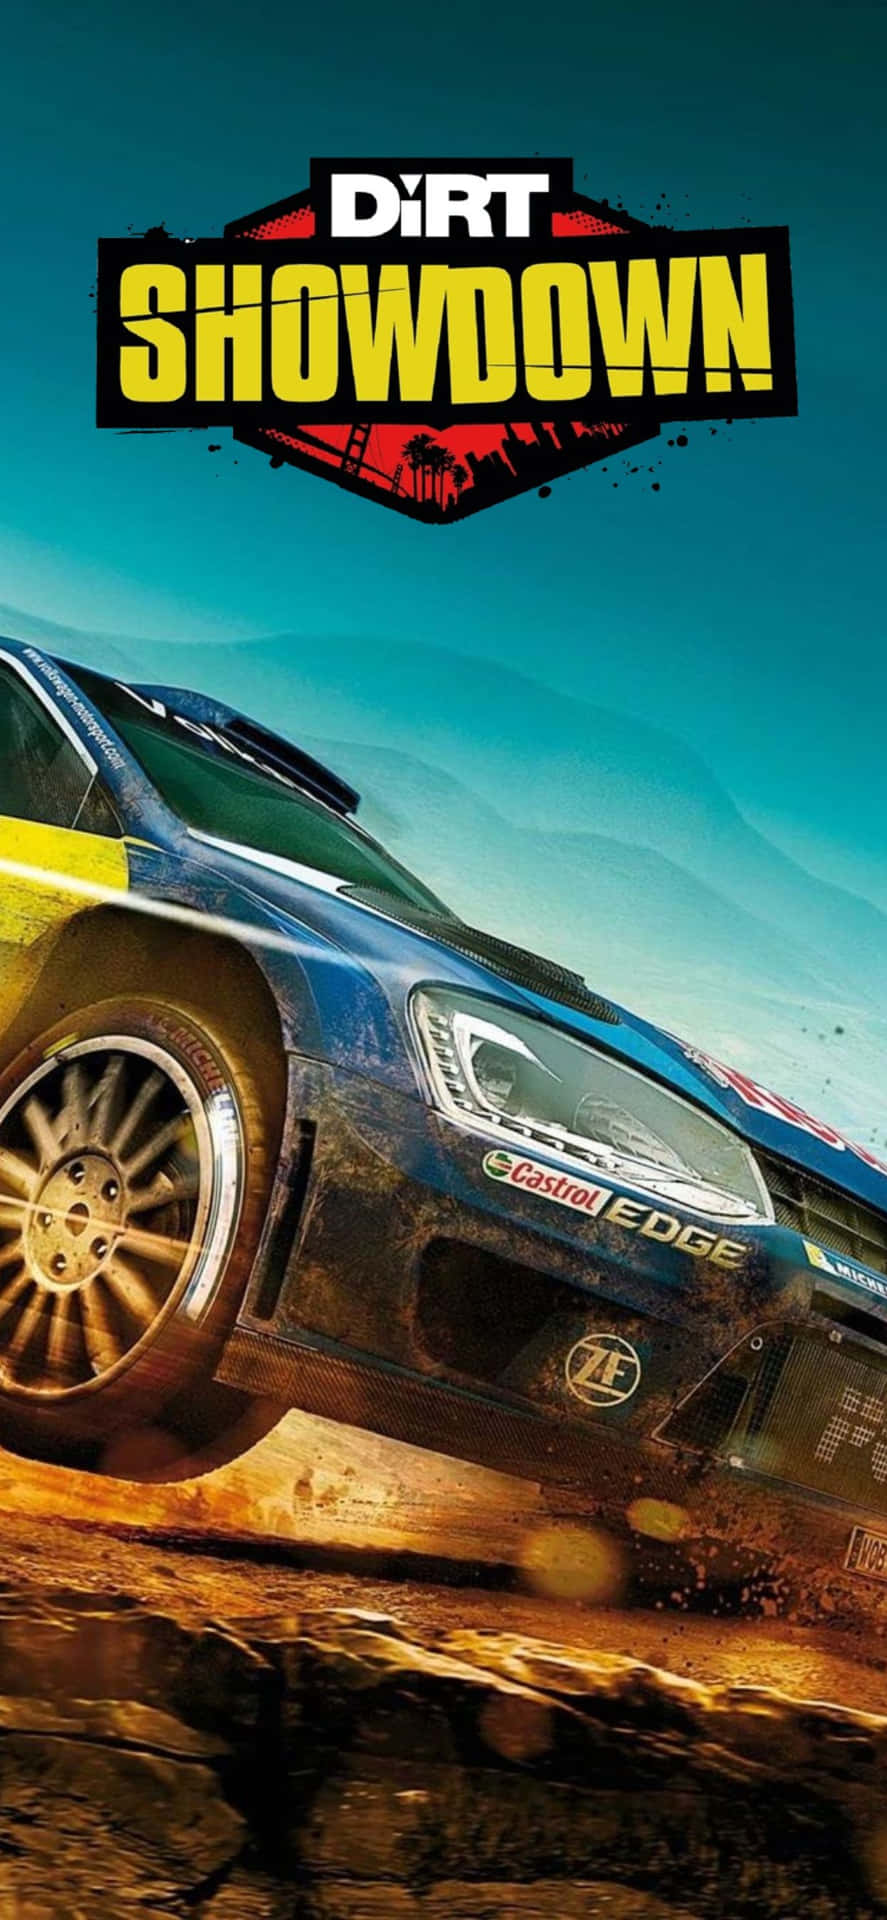 "Prepare for an Exciting Dirt Showdown on Your iPhone Xs Max!"